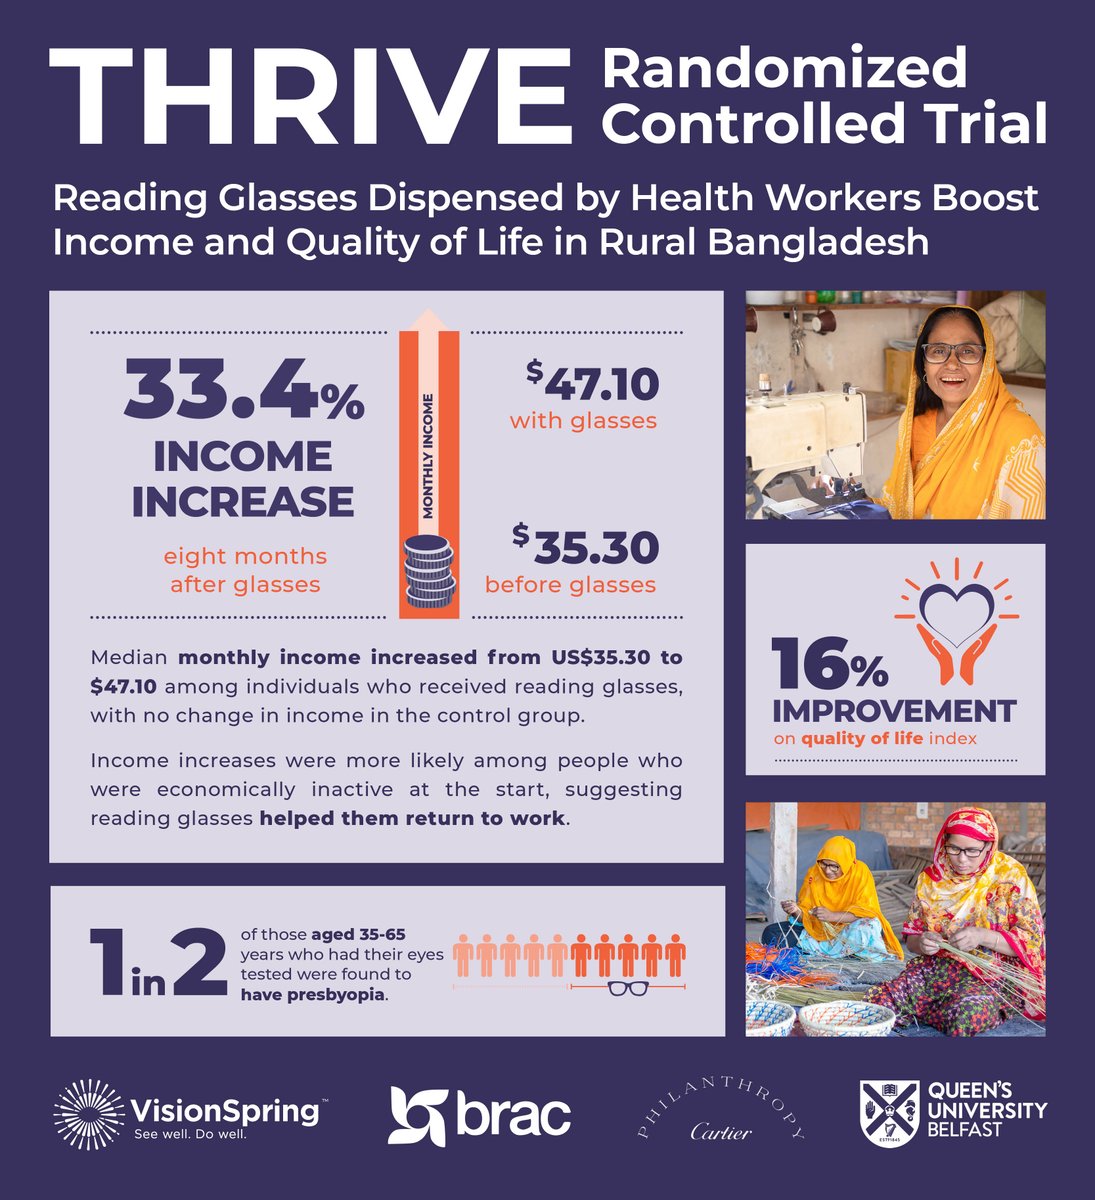 Terrific results: Reading glasses boost income by a third in low-income communities, according to a new study by @BRACworld @VisionSpring @Queens_Belfast. The most basic tools can catalyse immense change. bracusa.org/new-report-rea… @ellarain